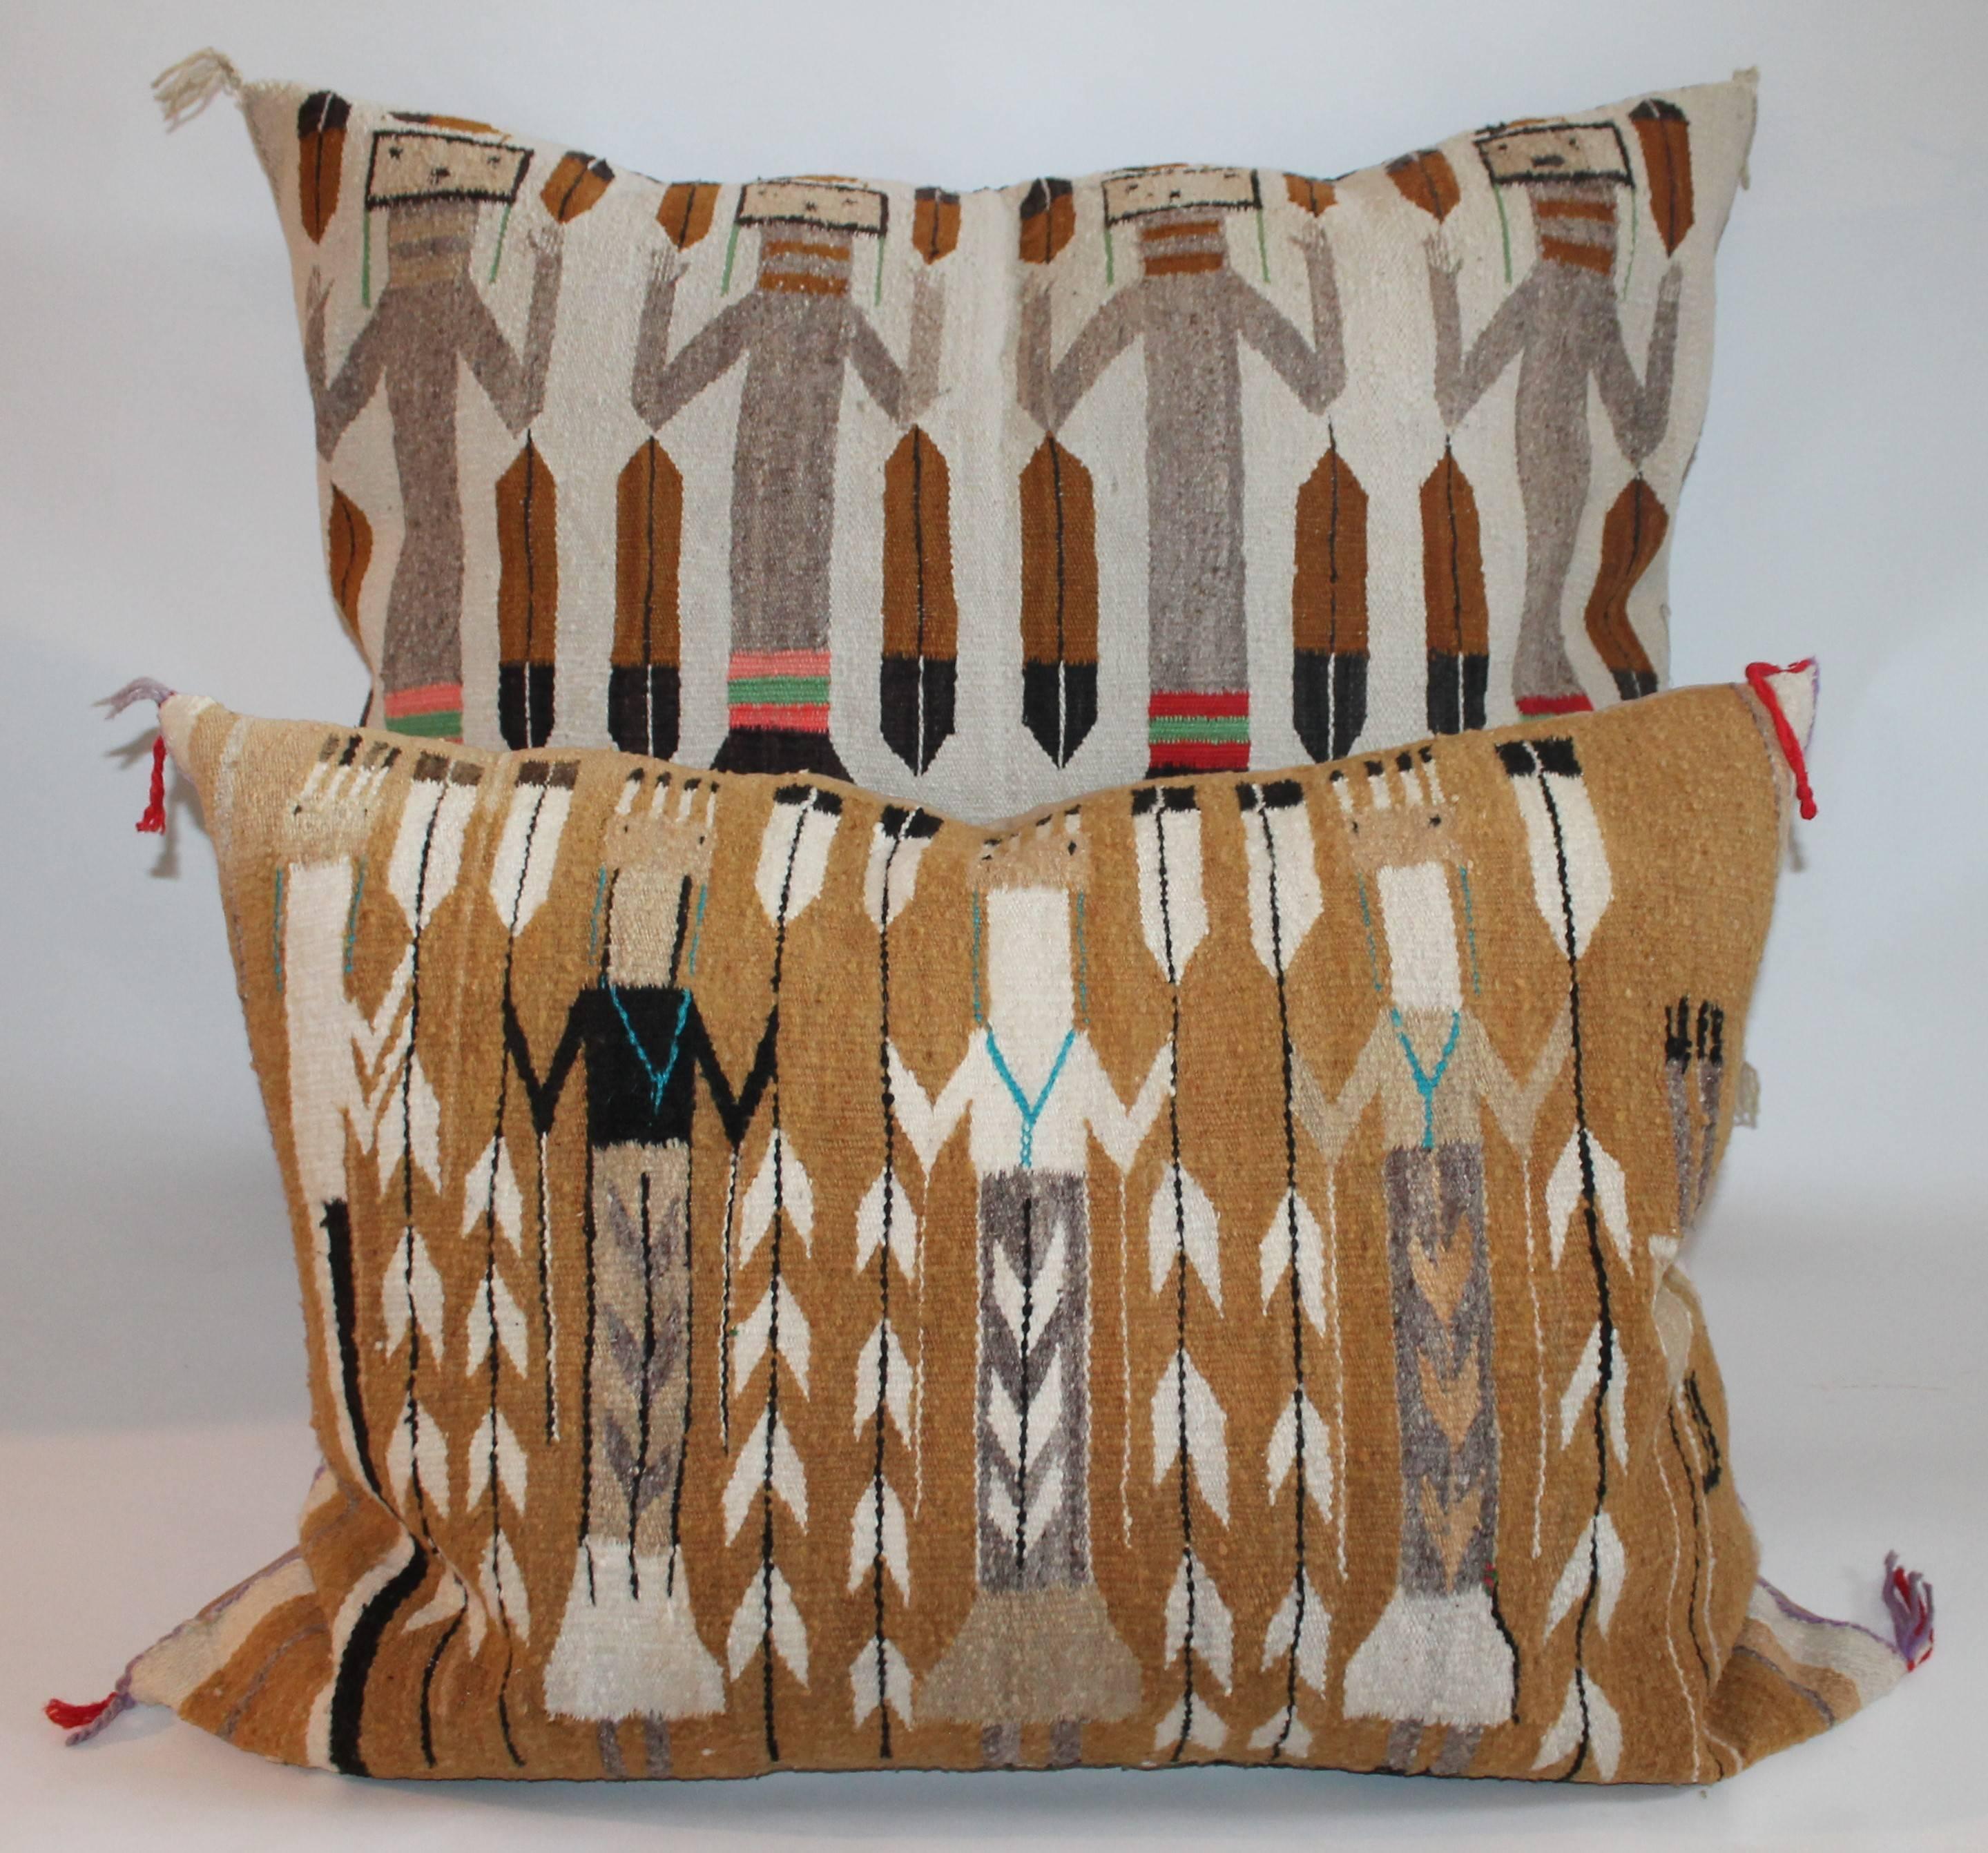 The condition is very good and sharp. The backing is in tan cotton linen.
The smaller of the two which is the Yea Pillow with the white feather pattern in between the Yea tribe members measures 26 inches high x 34.5 inches wide. Depth of the pillow